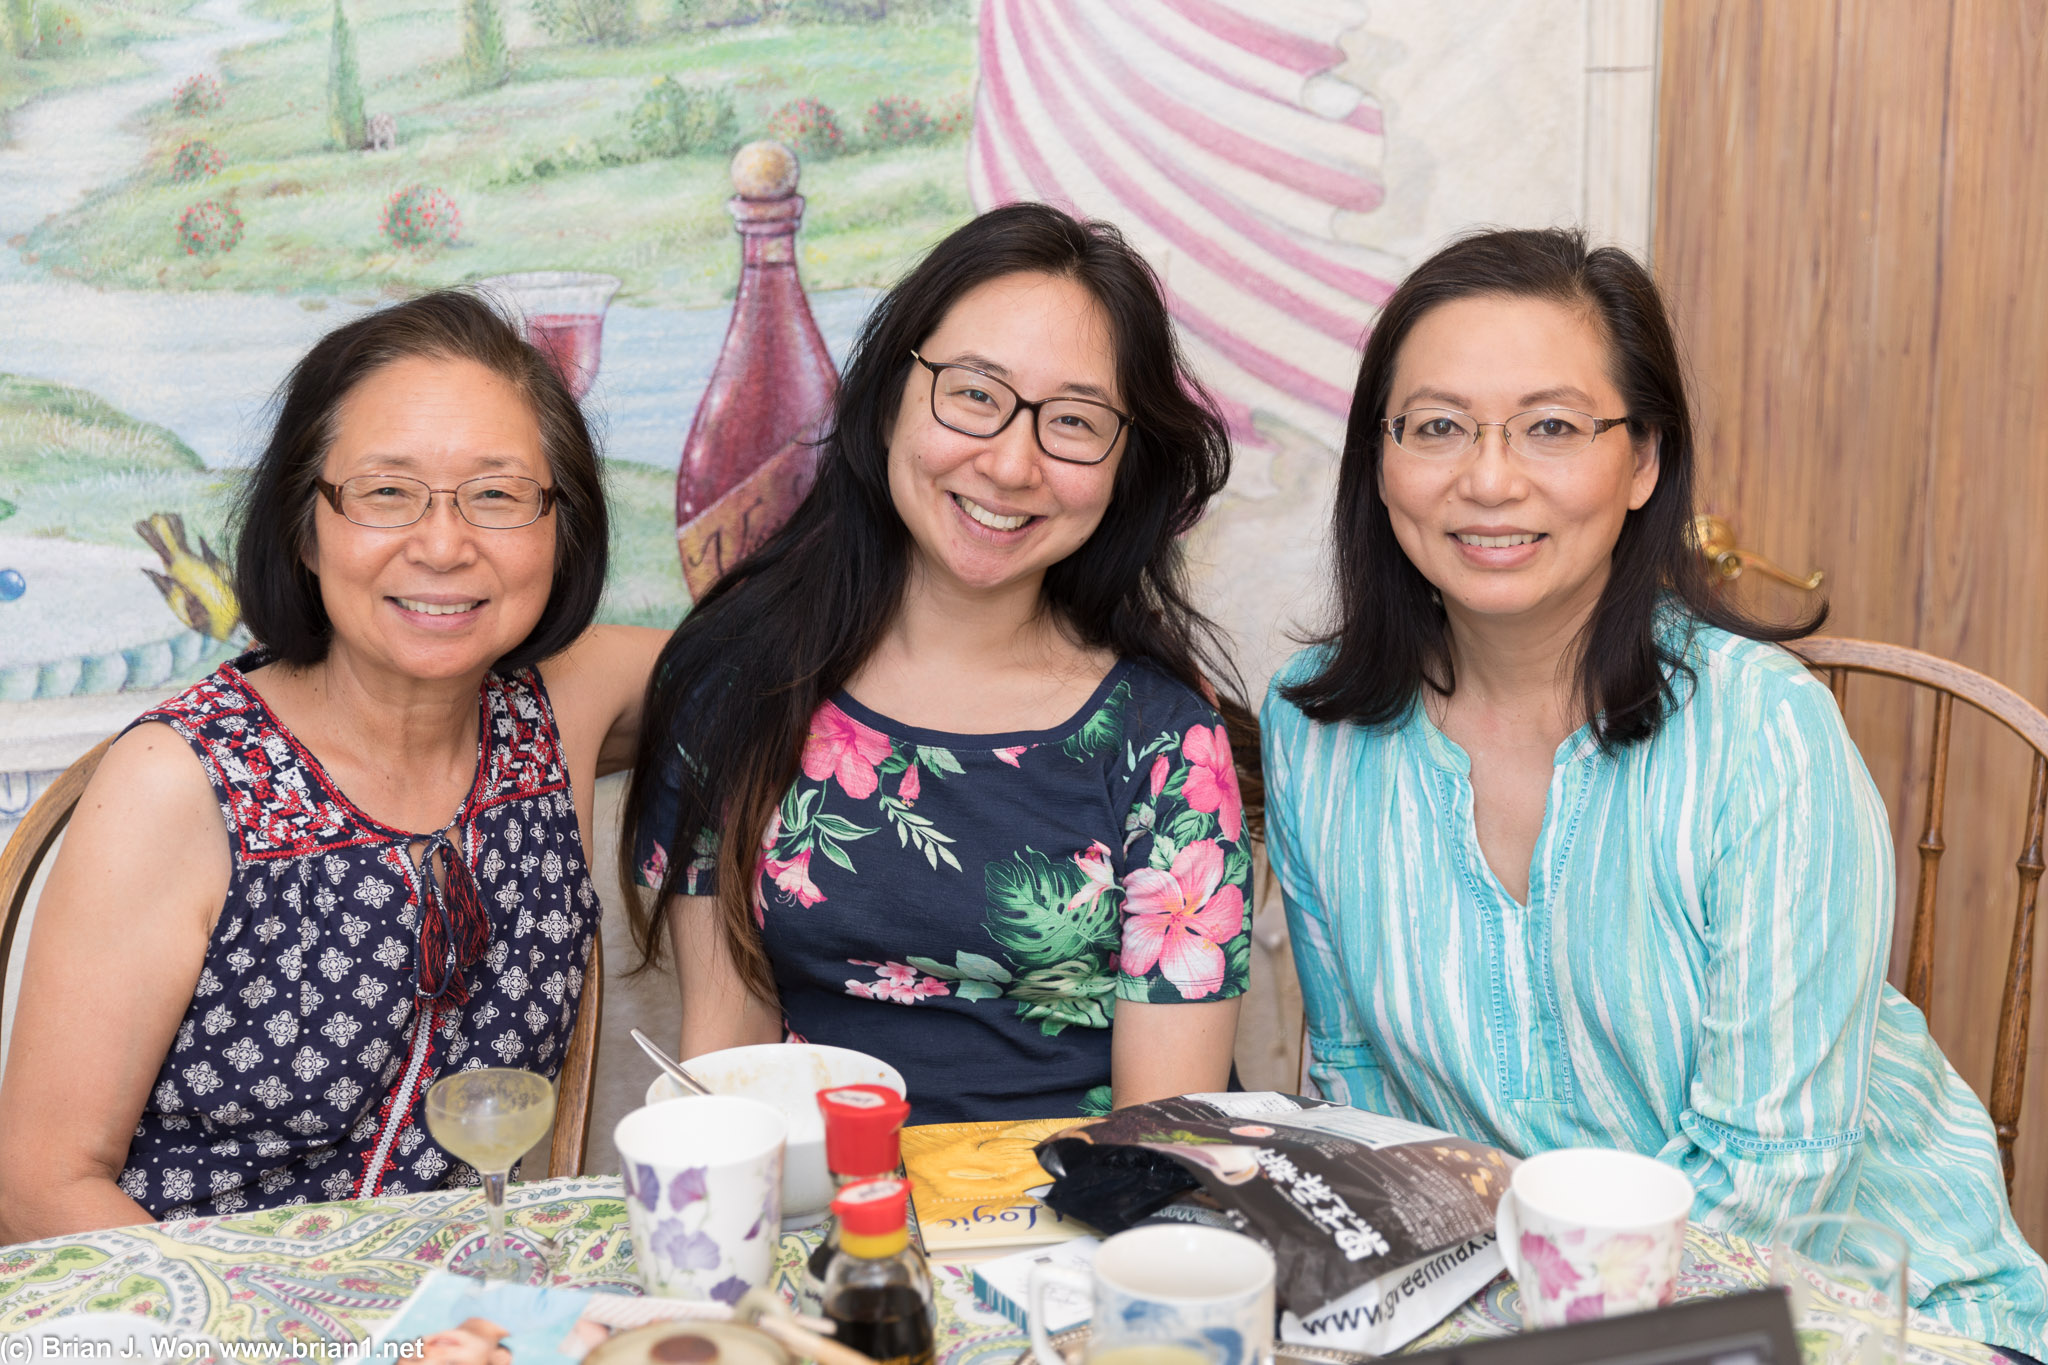 L to R: Mom, Gina, Aunt Pattey.